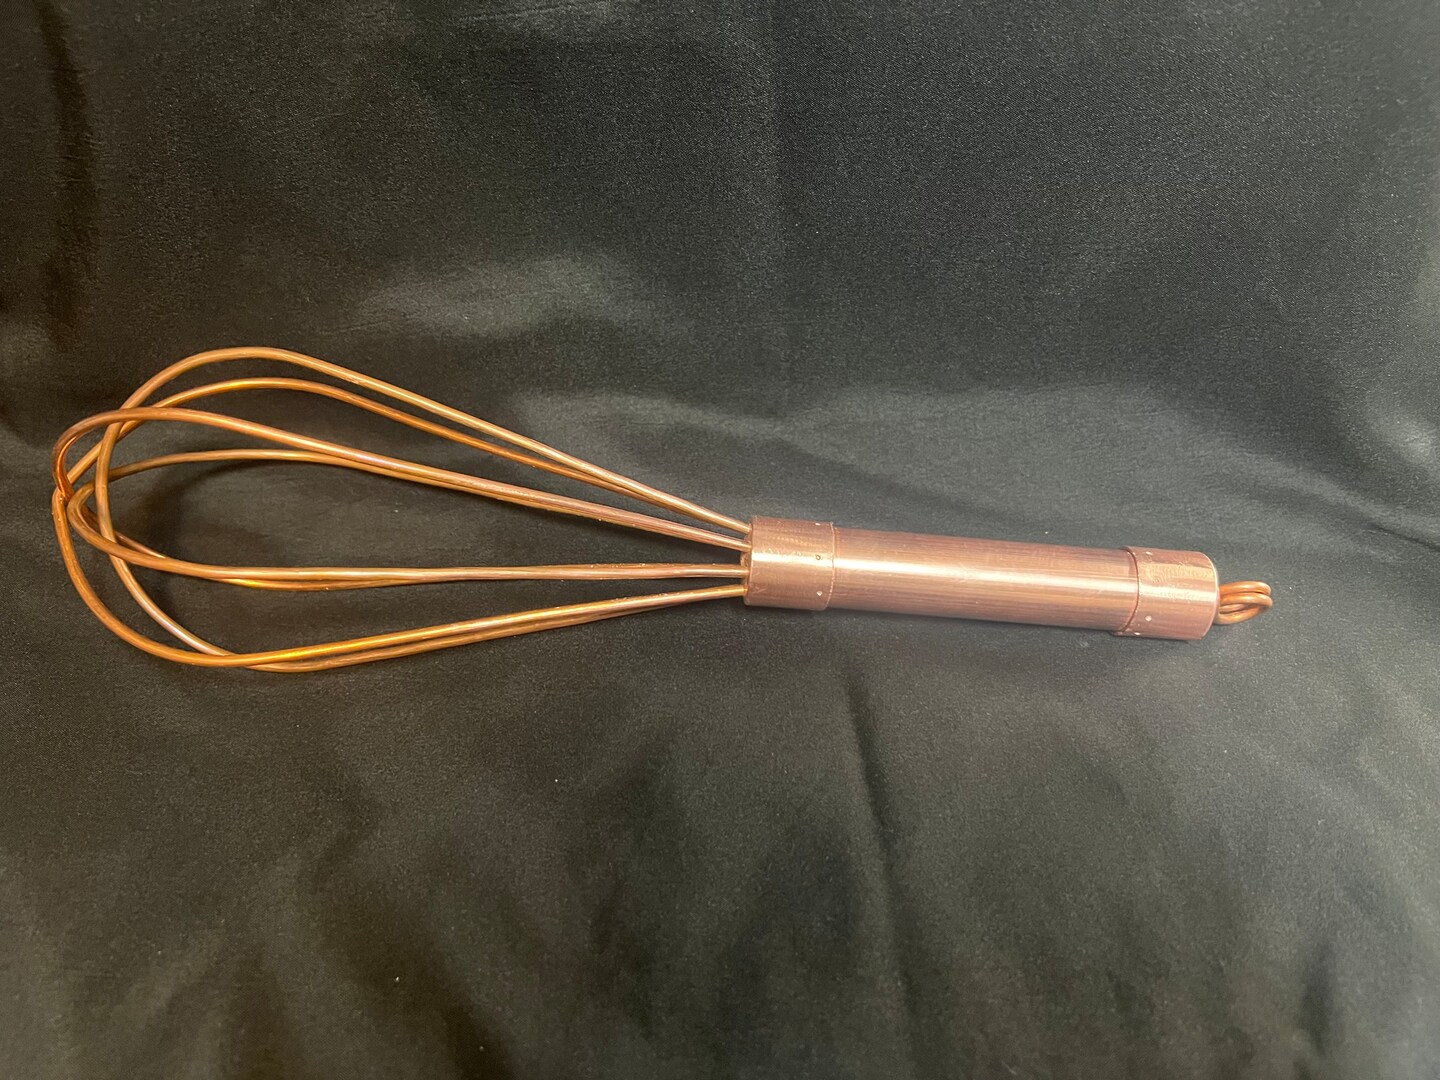 Large heavy duty Copper Whisk for cake or thicker batters making cheese  soups and sauces. All Copper construction with thick copper tines